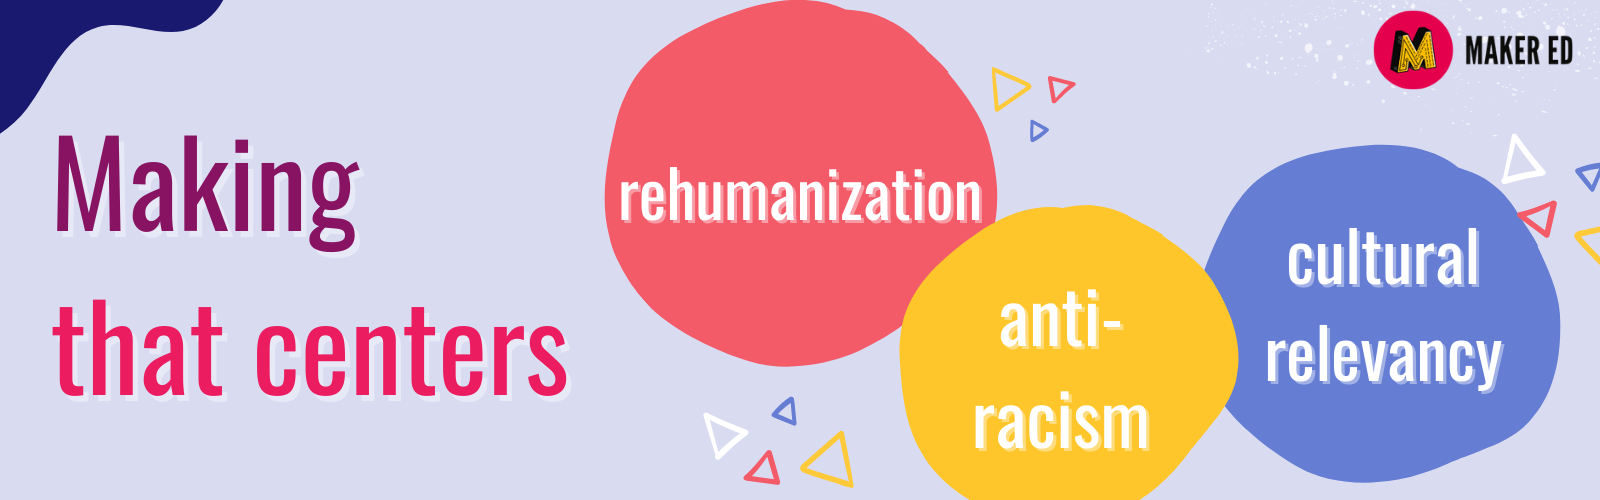 Making that centers rehumanization, anti-racism, cultural relevancy